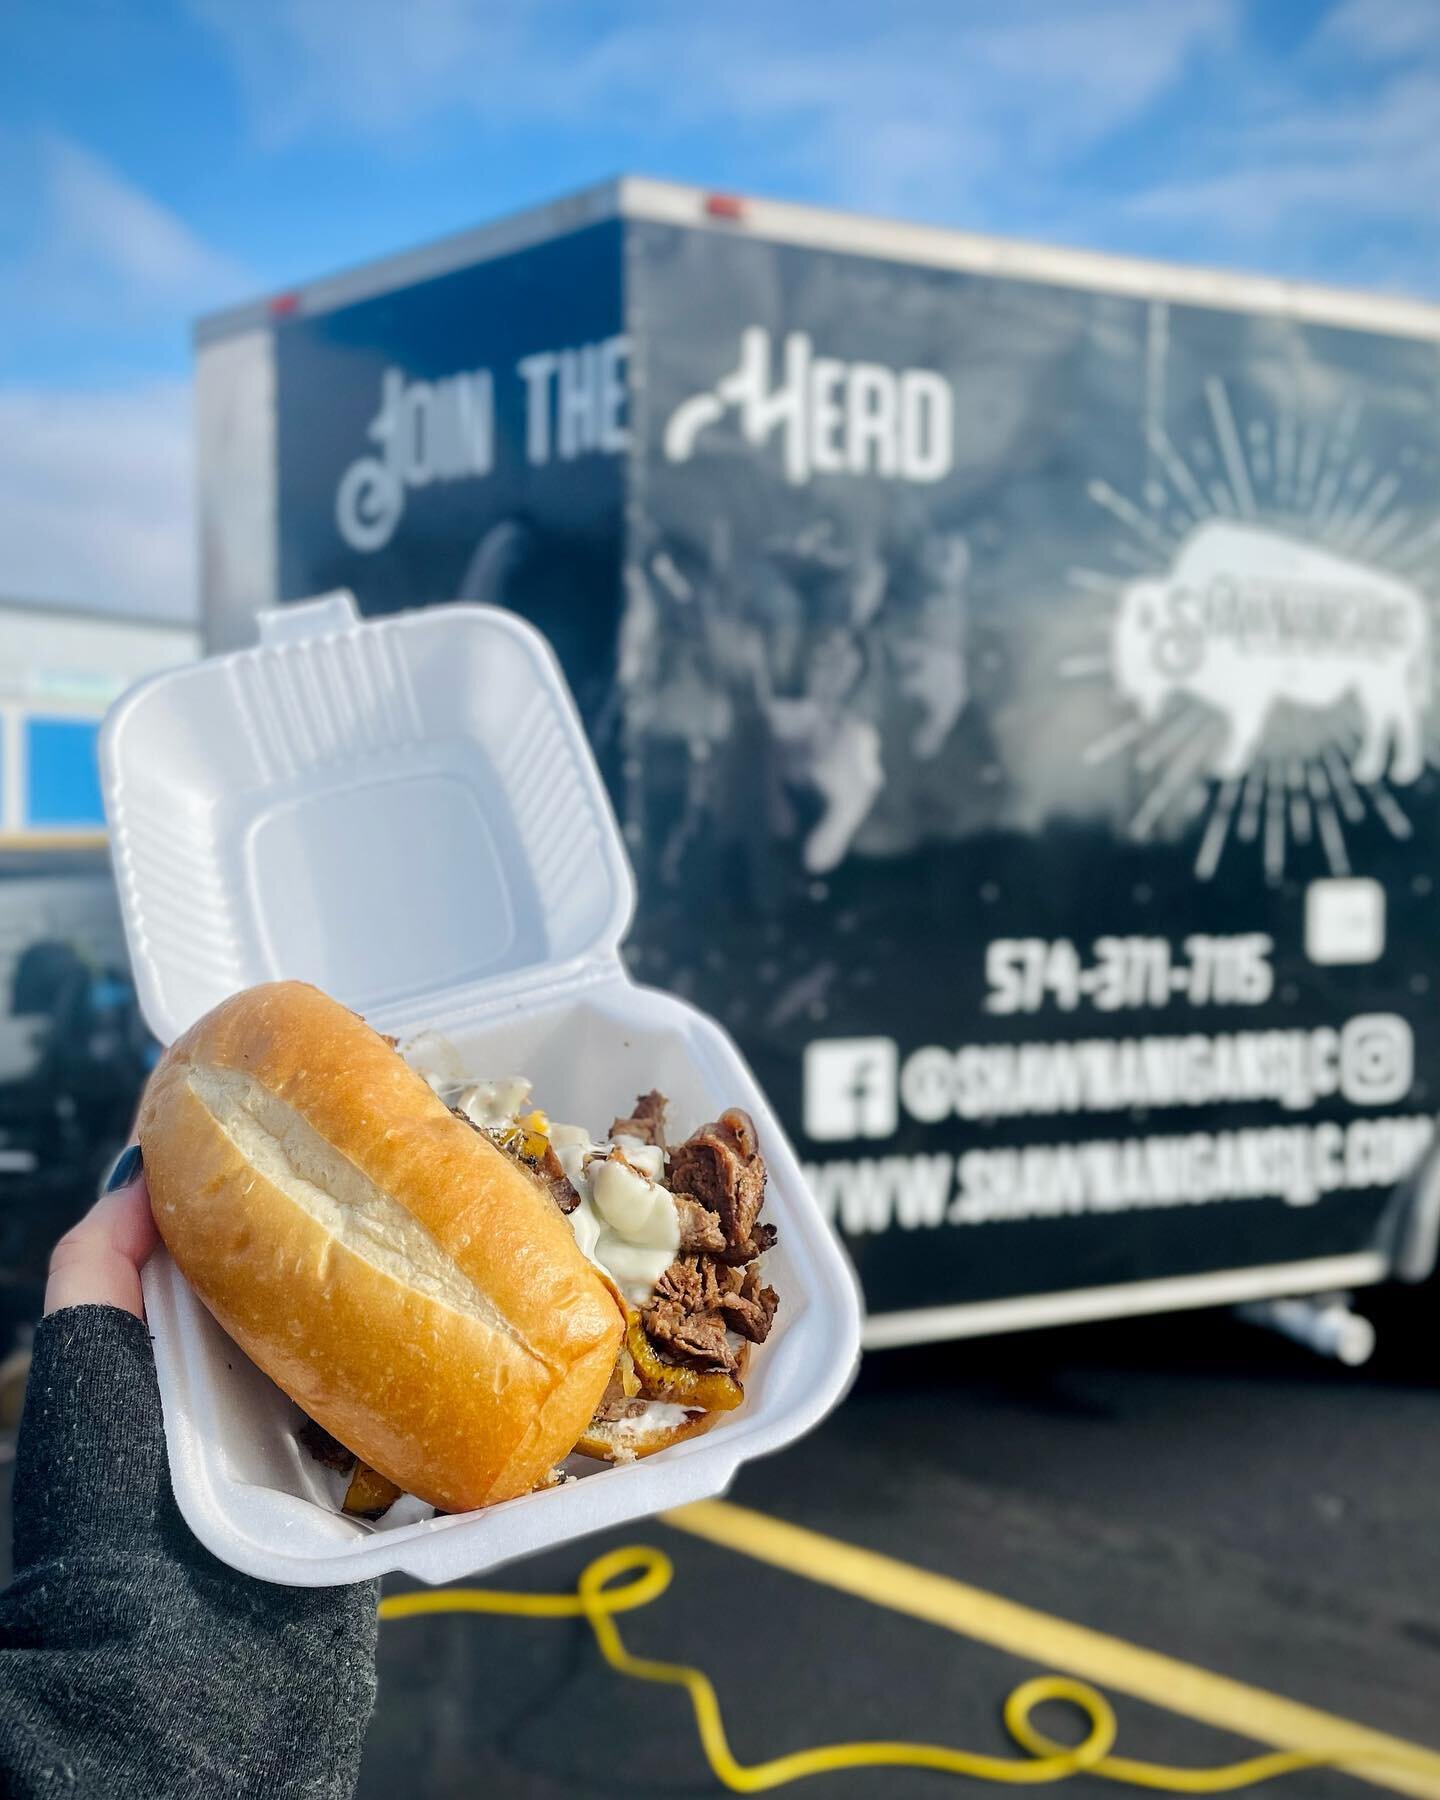 We were so busy making cheesesteaks yesterday that we almost forgot that we&rsquo;re a bison burger truck! 😂 

Come grab a Shawnanigans Cheesesteak or 1/2lb bison cheeseburger for lunch today at 1701 E Center St. Warsaw 11-2pm 

#cheesesteak #chefsp